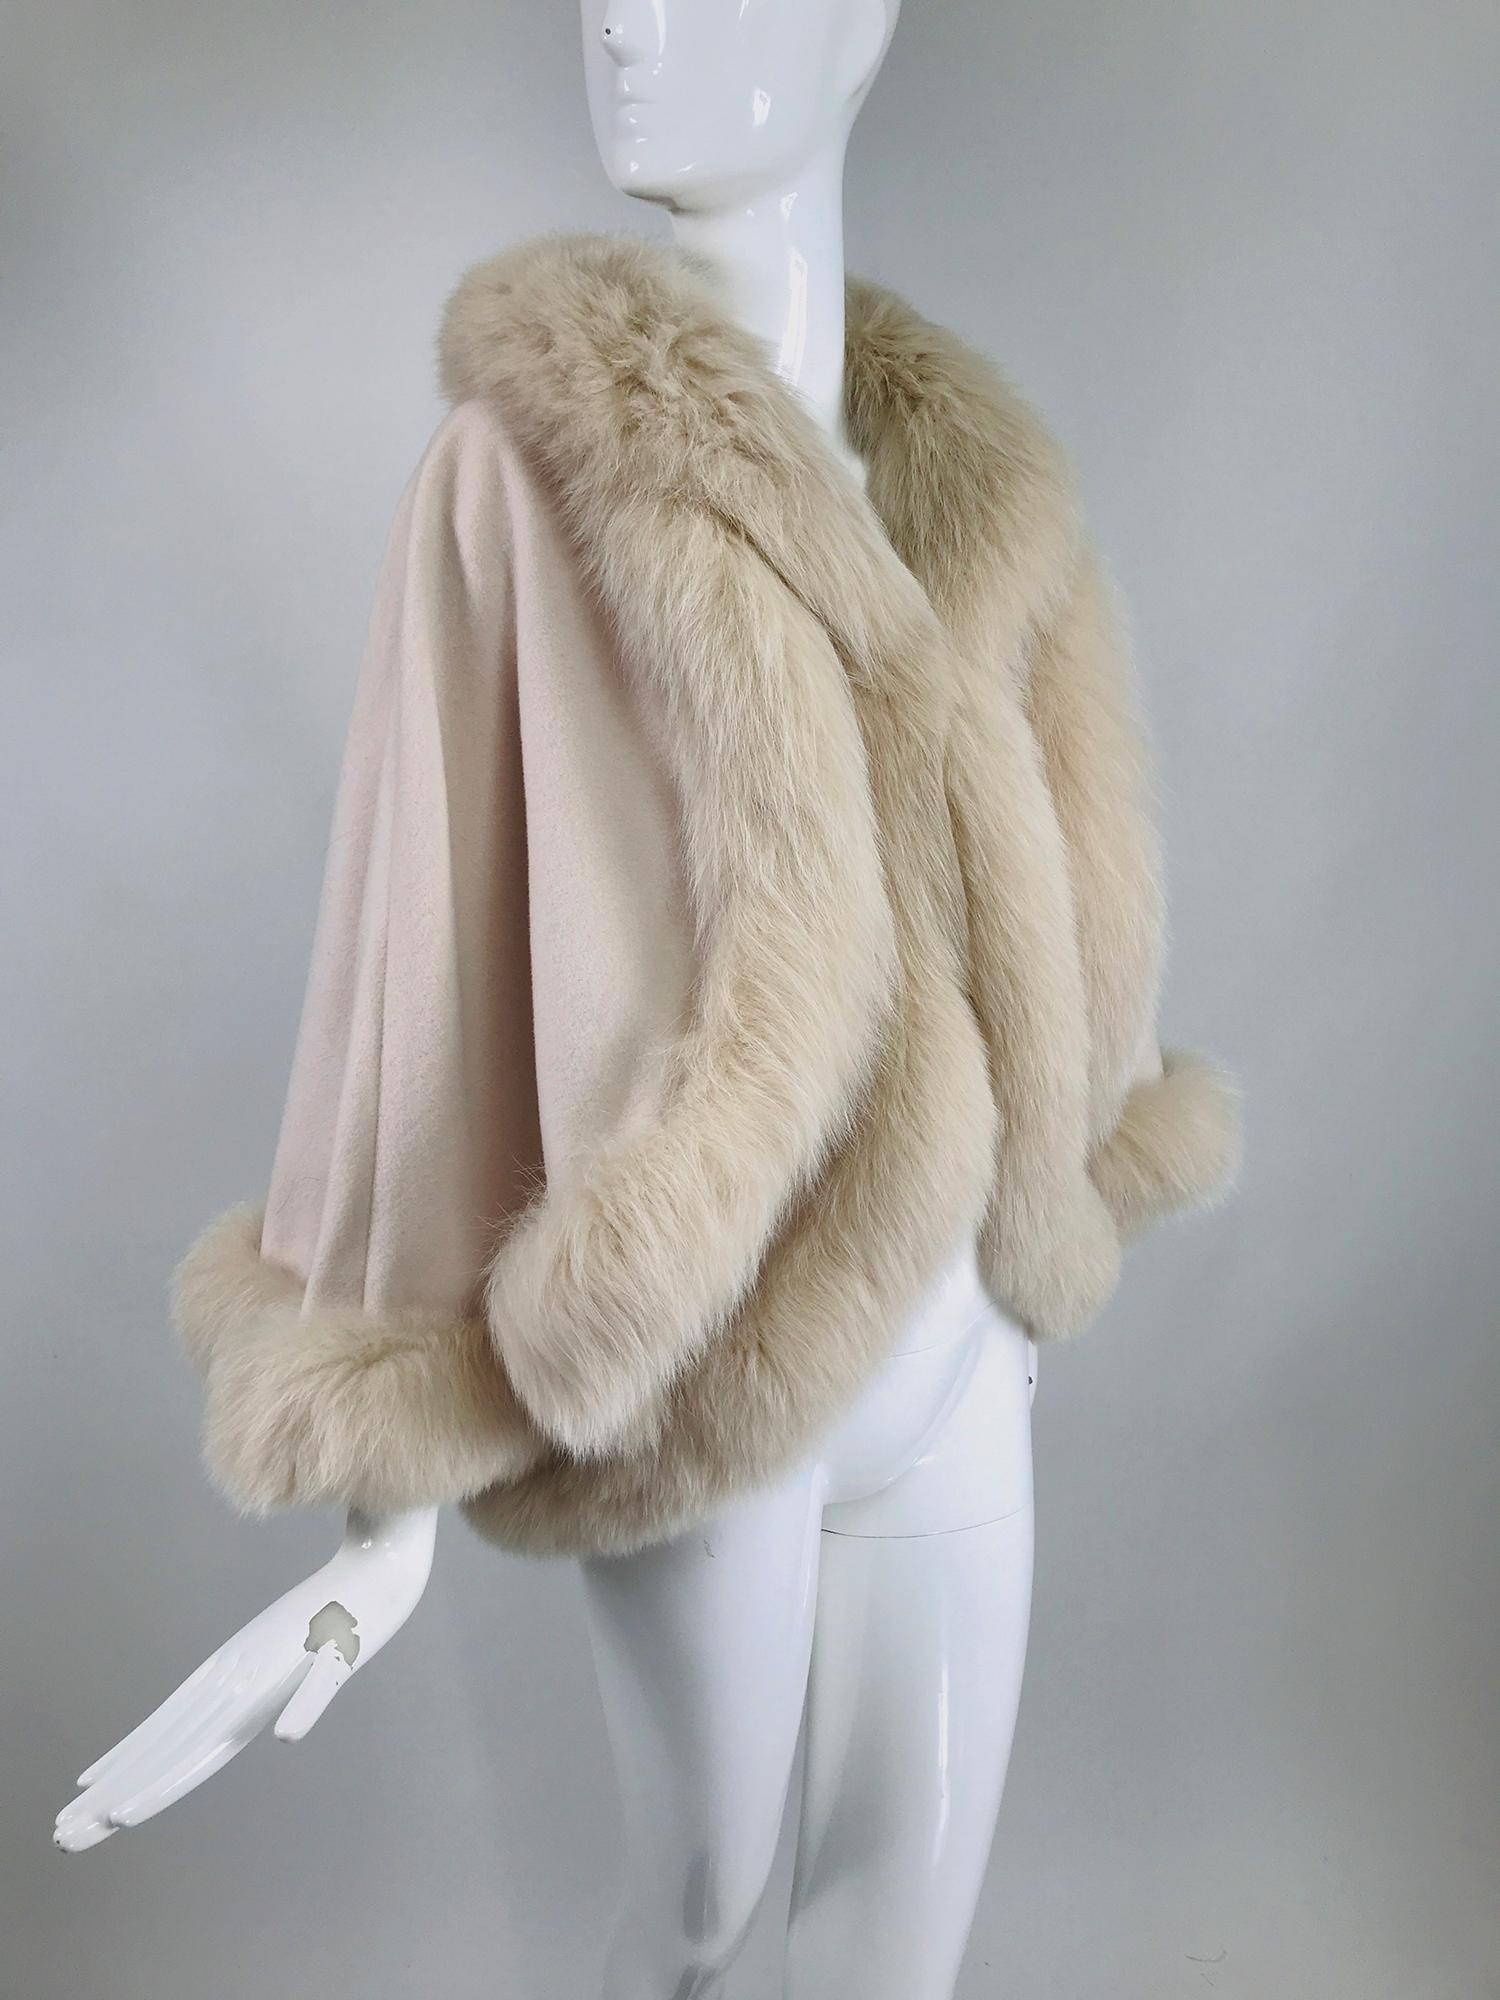 Giorgio, Italy pale pink cashmere cape and vest combination, with fox fur trim. Wear as a cape or wear as a vest or wear both together. The cape attaches to the vest with hidden snaps at the neck. Beautiful soft cashmere is unlined. The cape closes